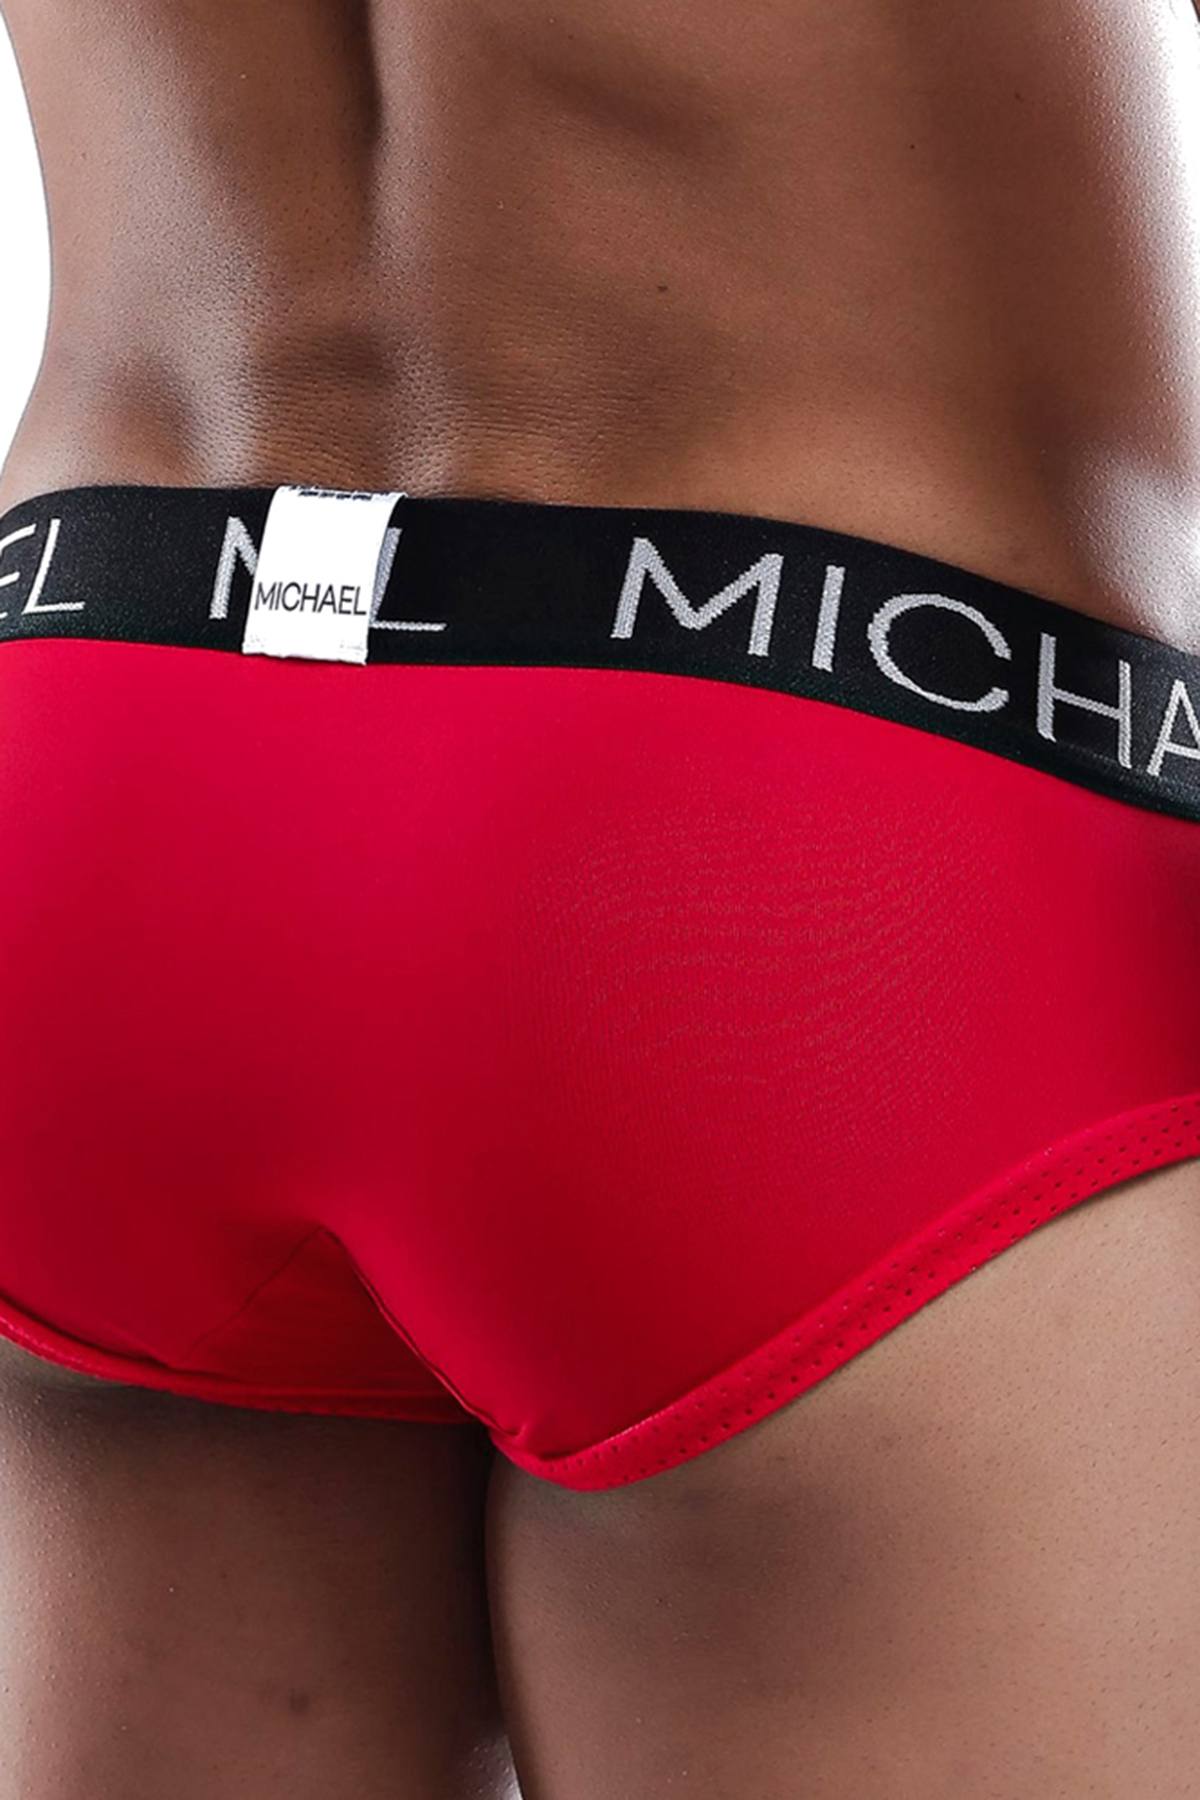 Michael MLH017 Cardinal Red Brief